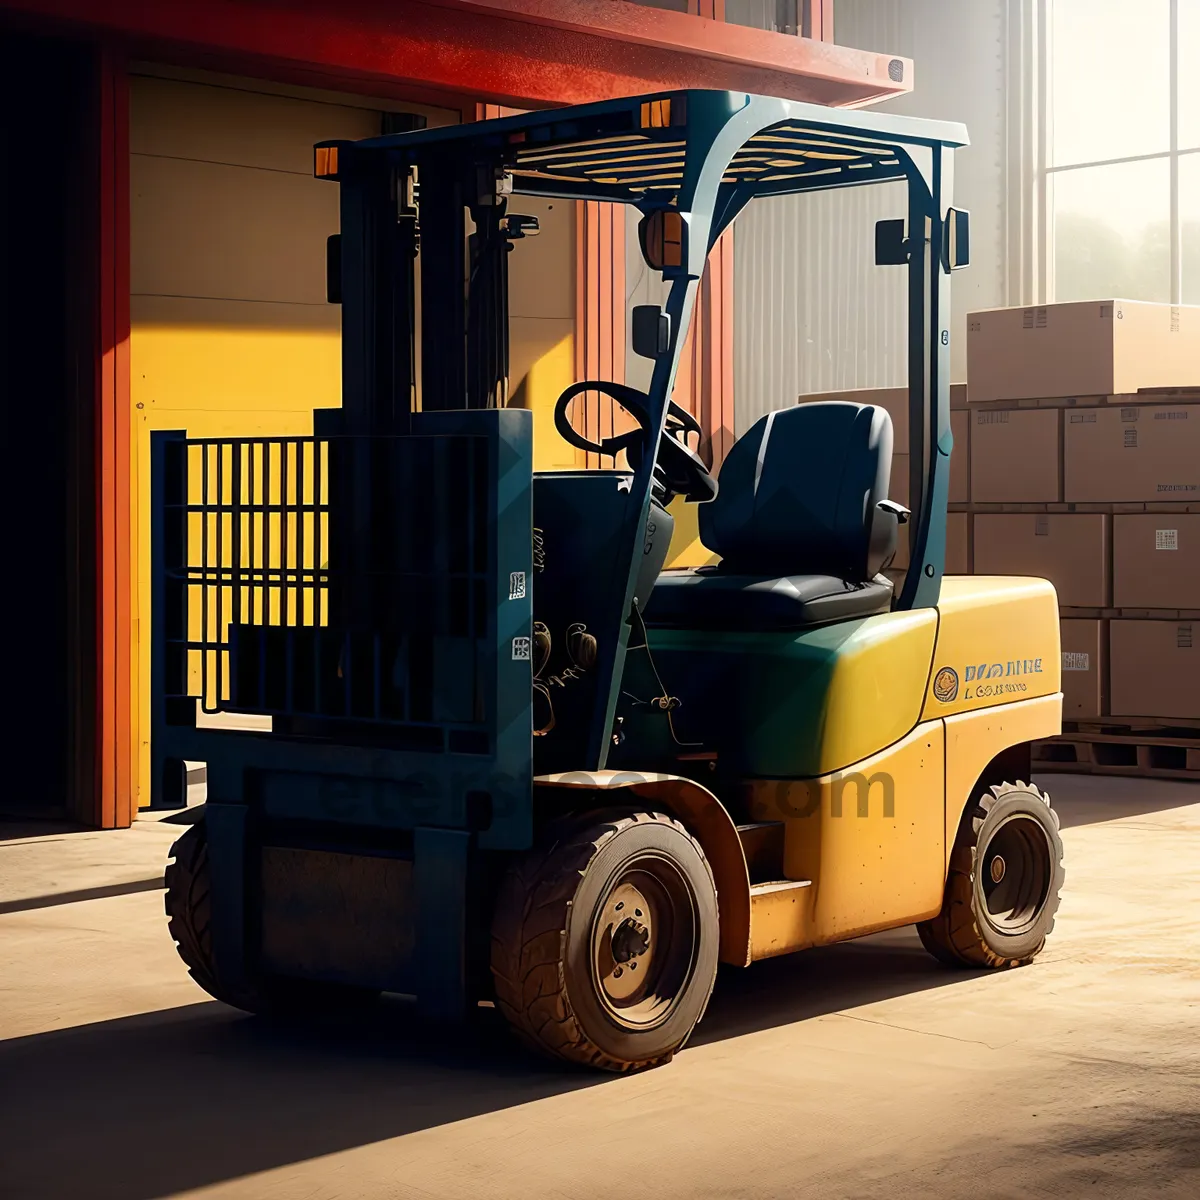 Picture of Industrial Heavy Forklift Truck Transporting Cargo in Warehouse